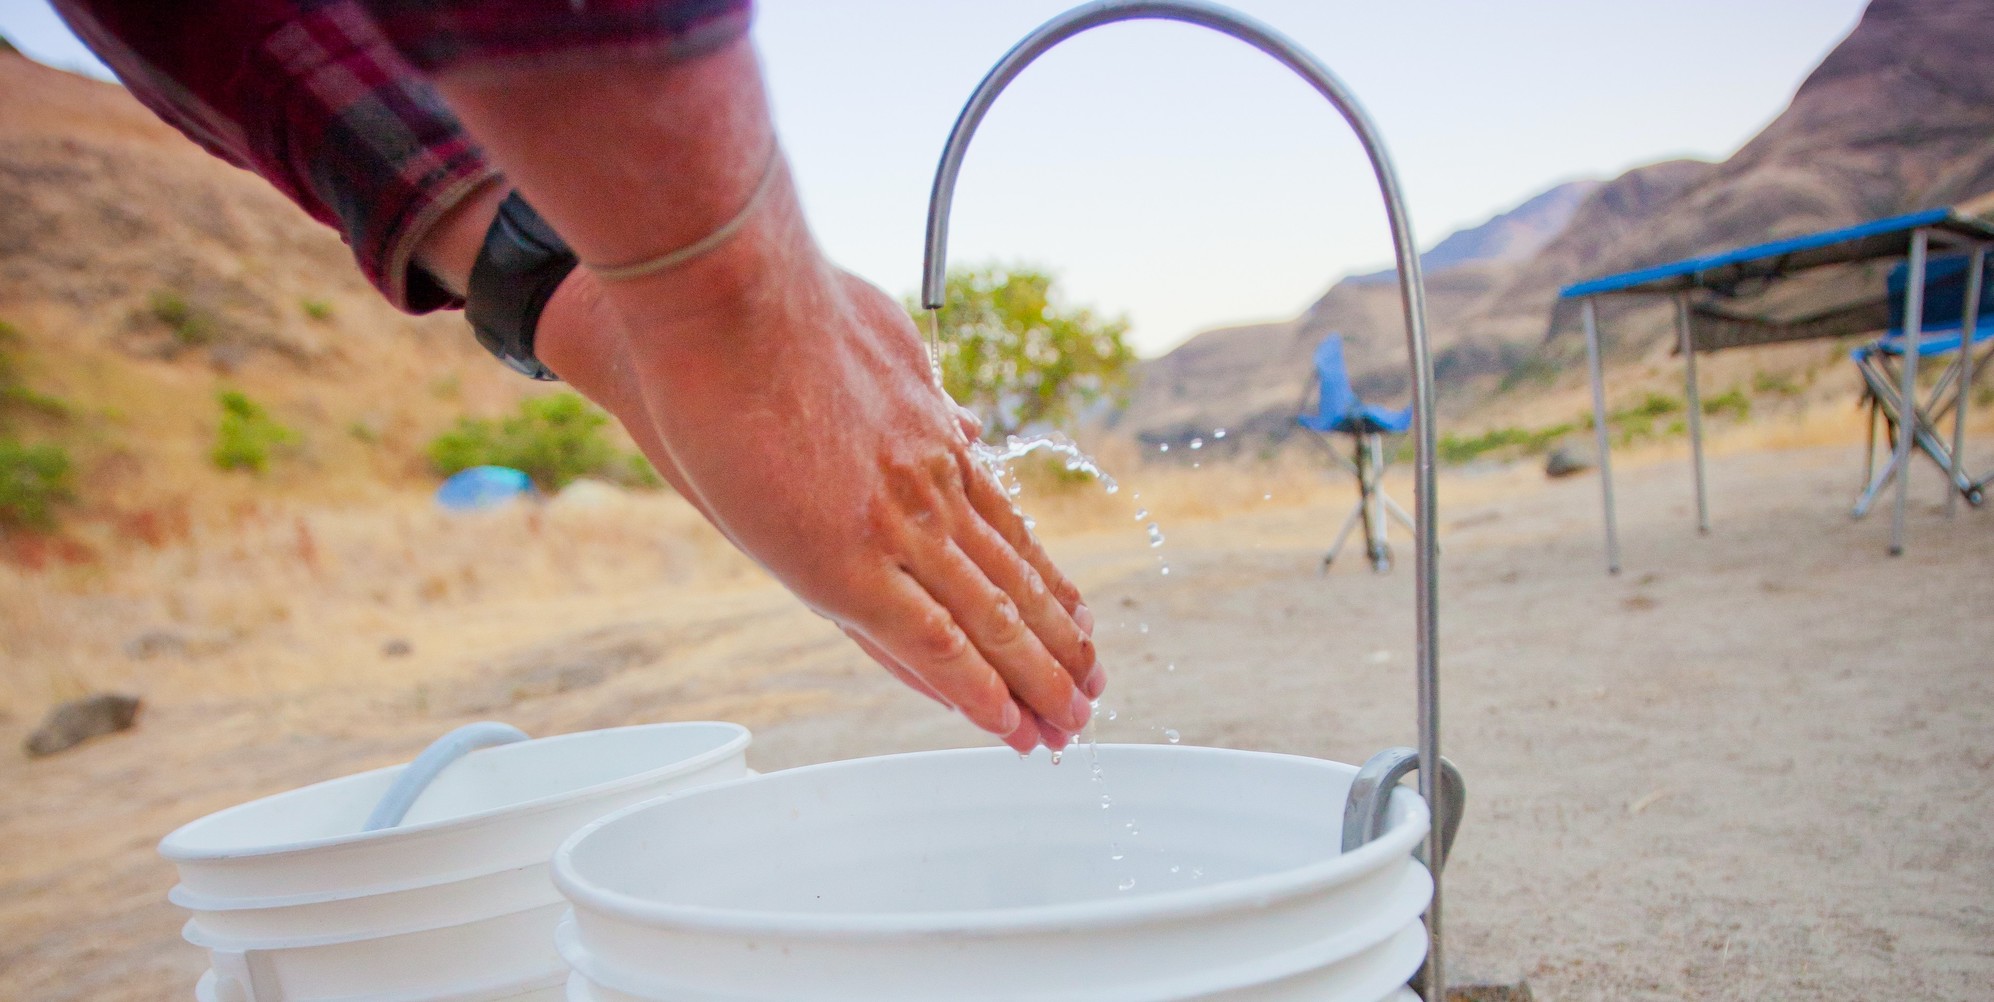 A person washing their hands into a white bucket while camping along a river